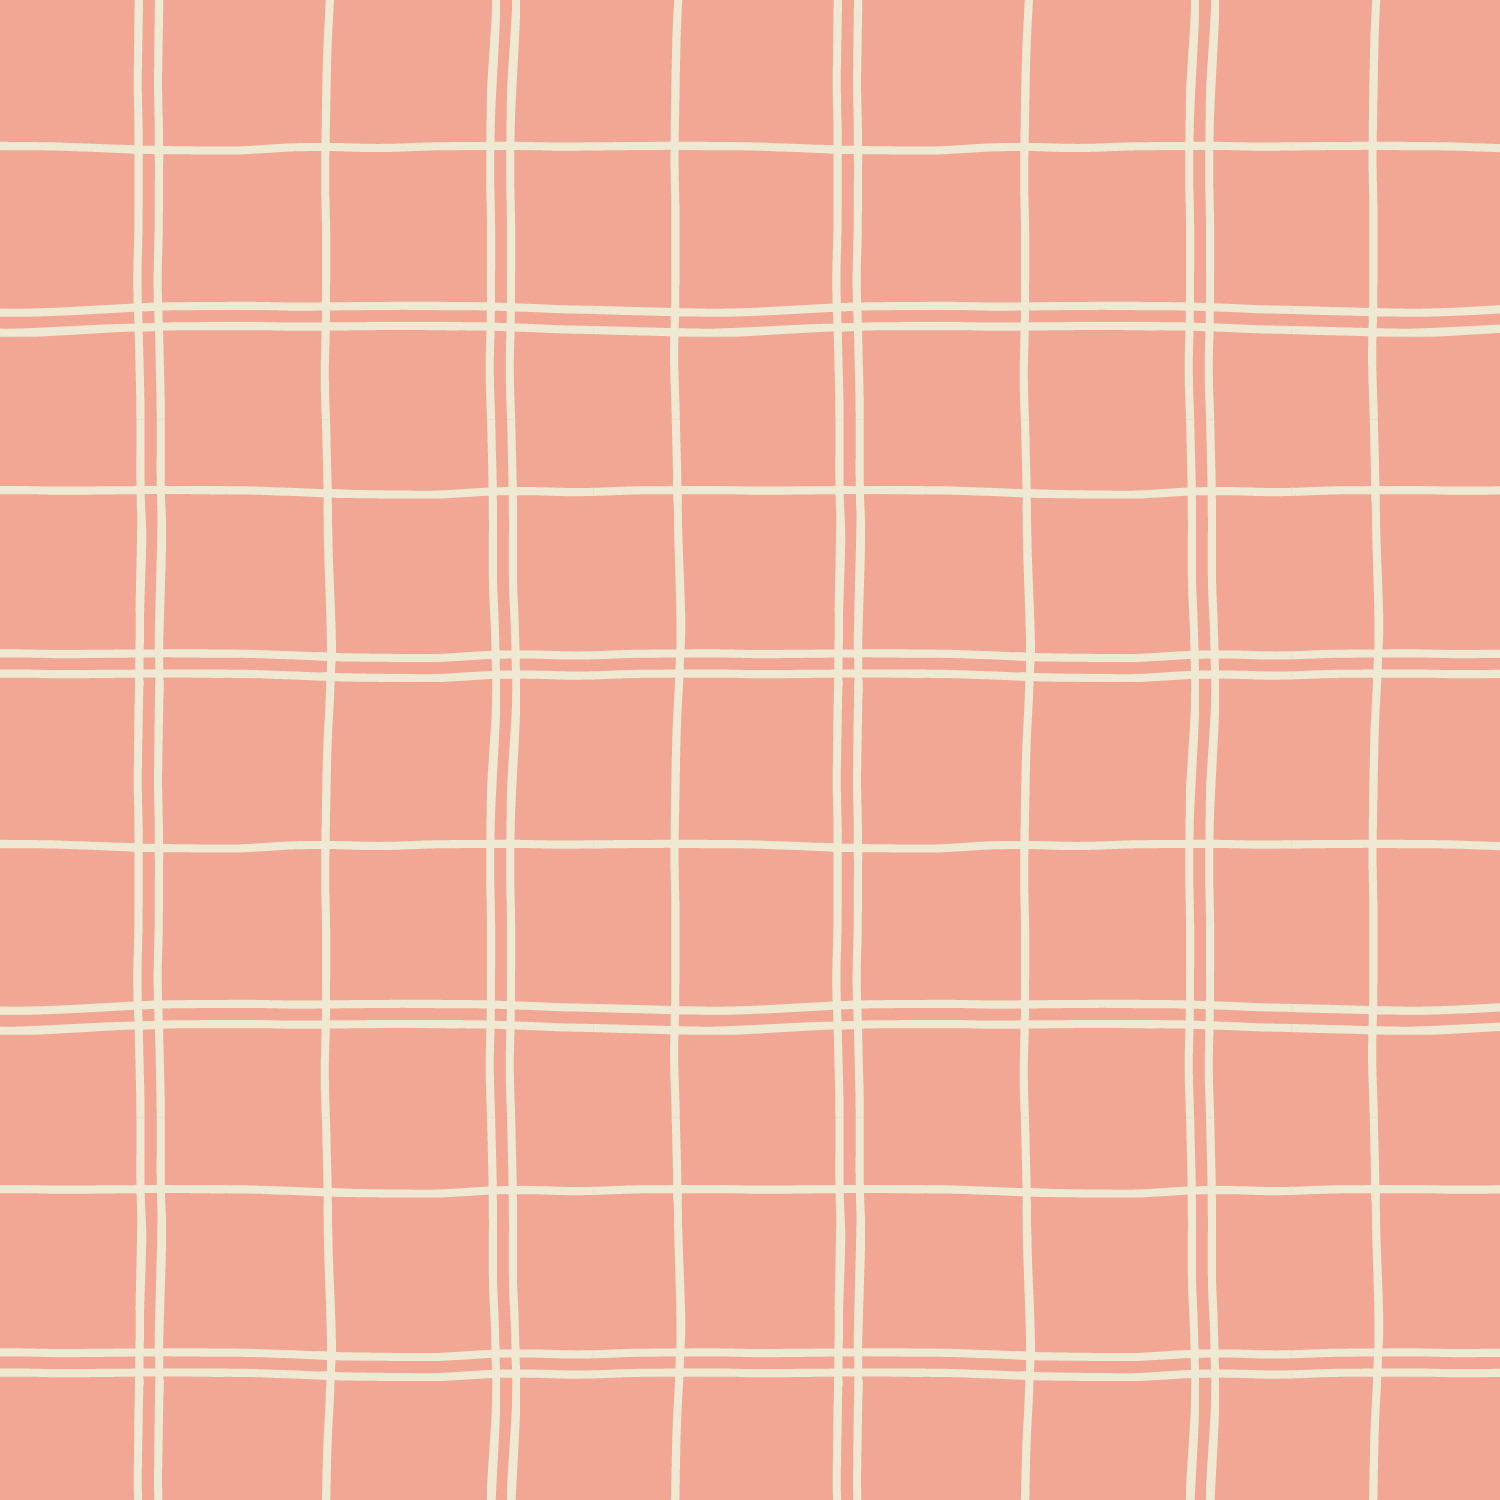 Patterns_Gallery_1E.png